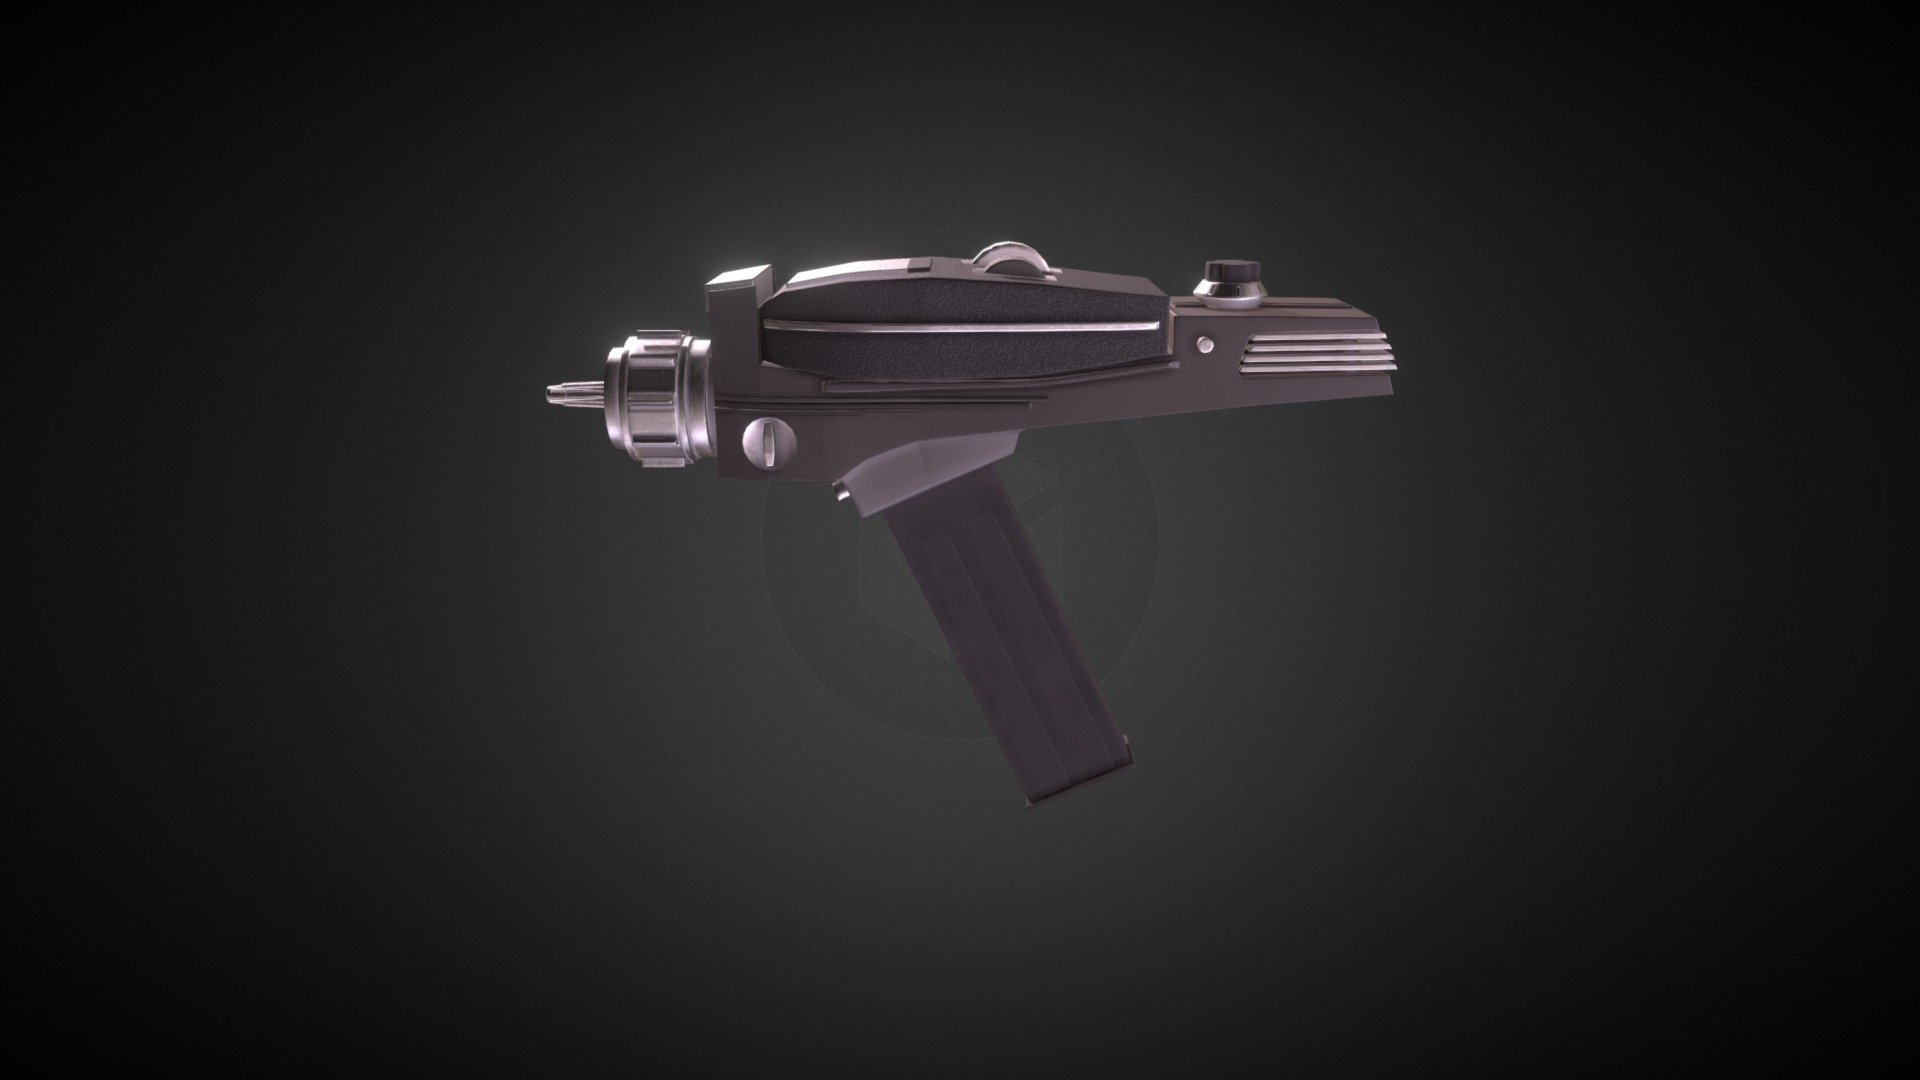 A Low Poly Star Treak hand Phaser. Modelled and textured as a part of  learning Game asset creation 3d model